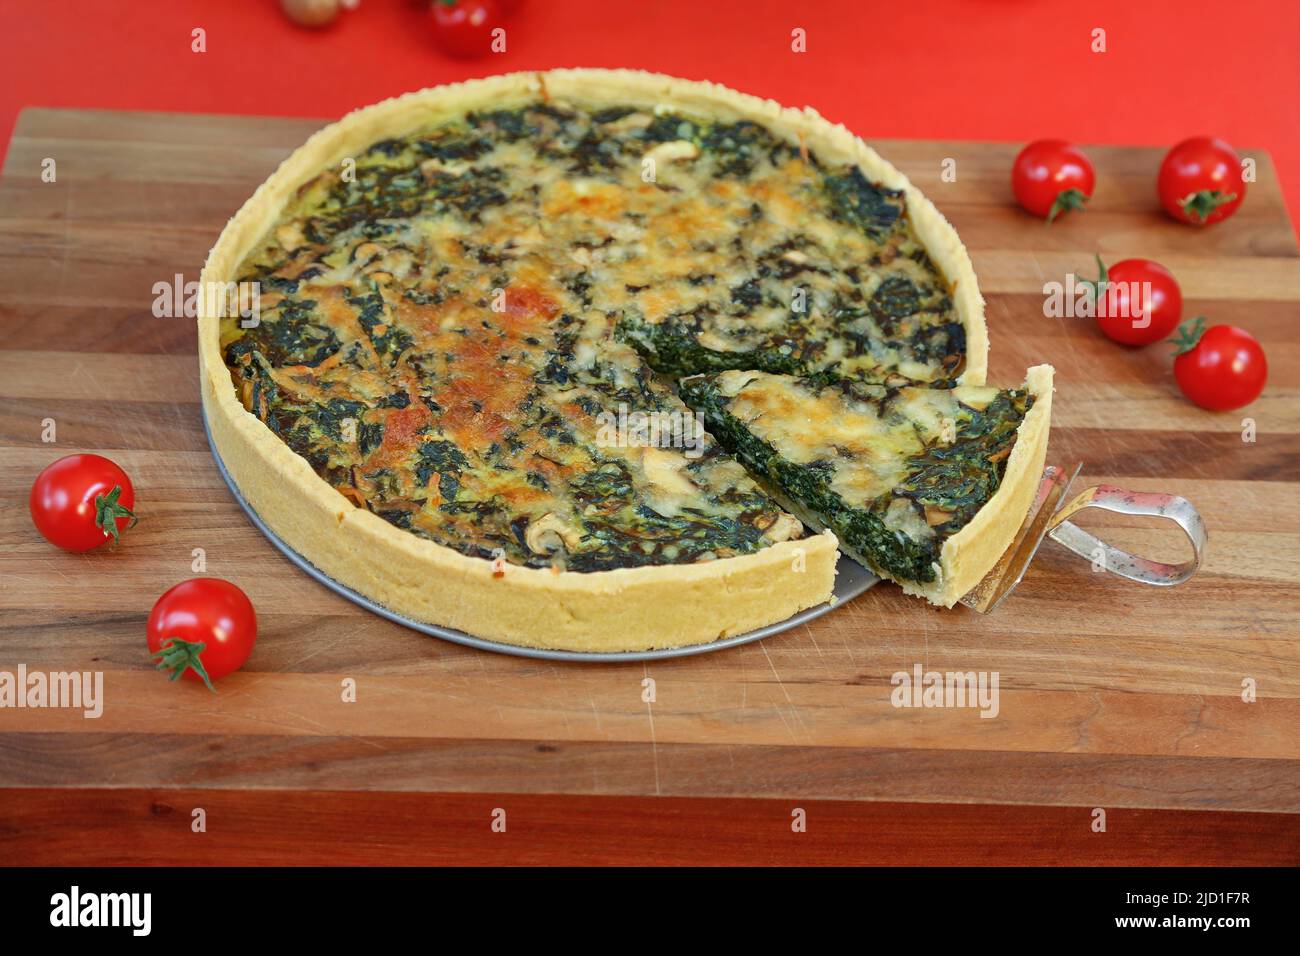 Swabian cuisine, spinach cake with shortcrust base, savoury cake, main course, bake, out of the oven, typical Swabian, vegetarian, healthy Stock Photo